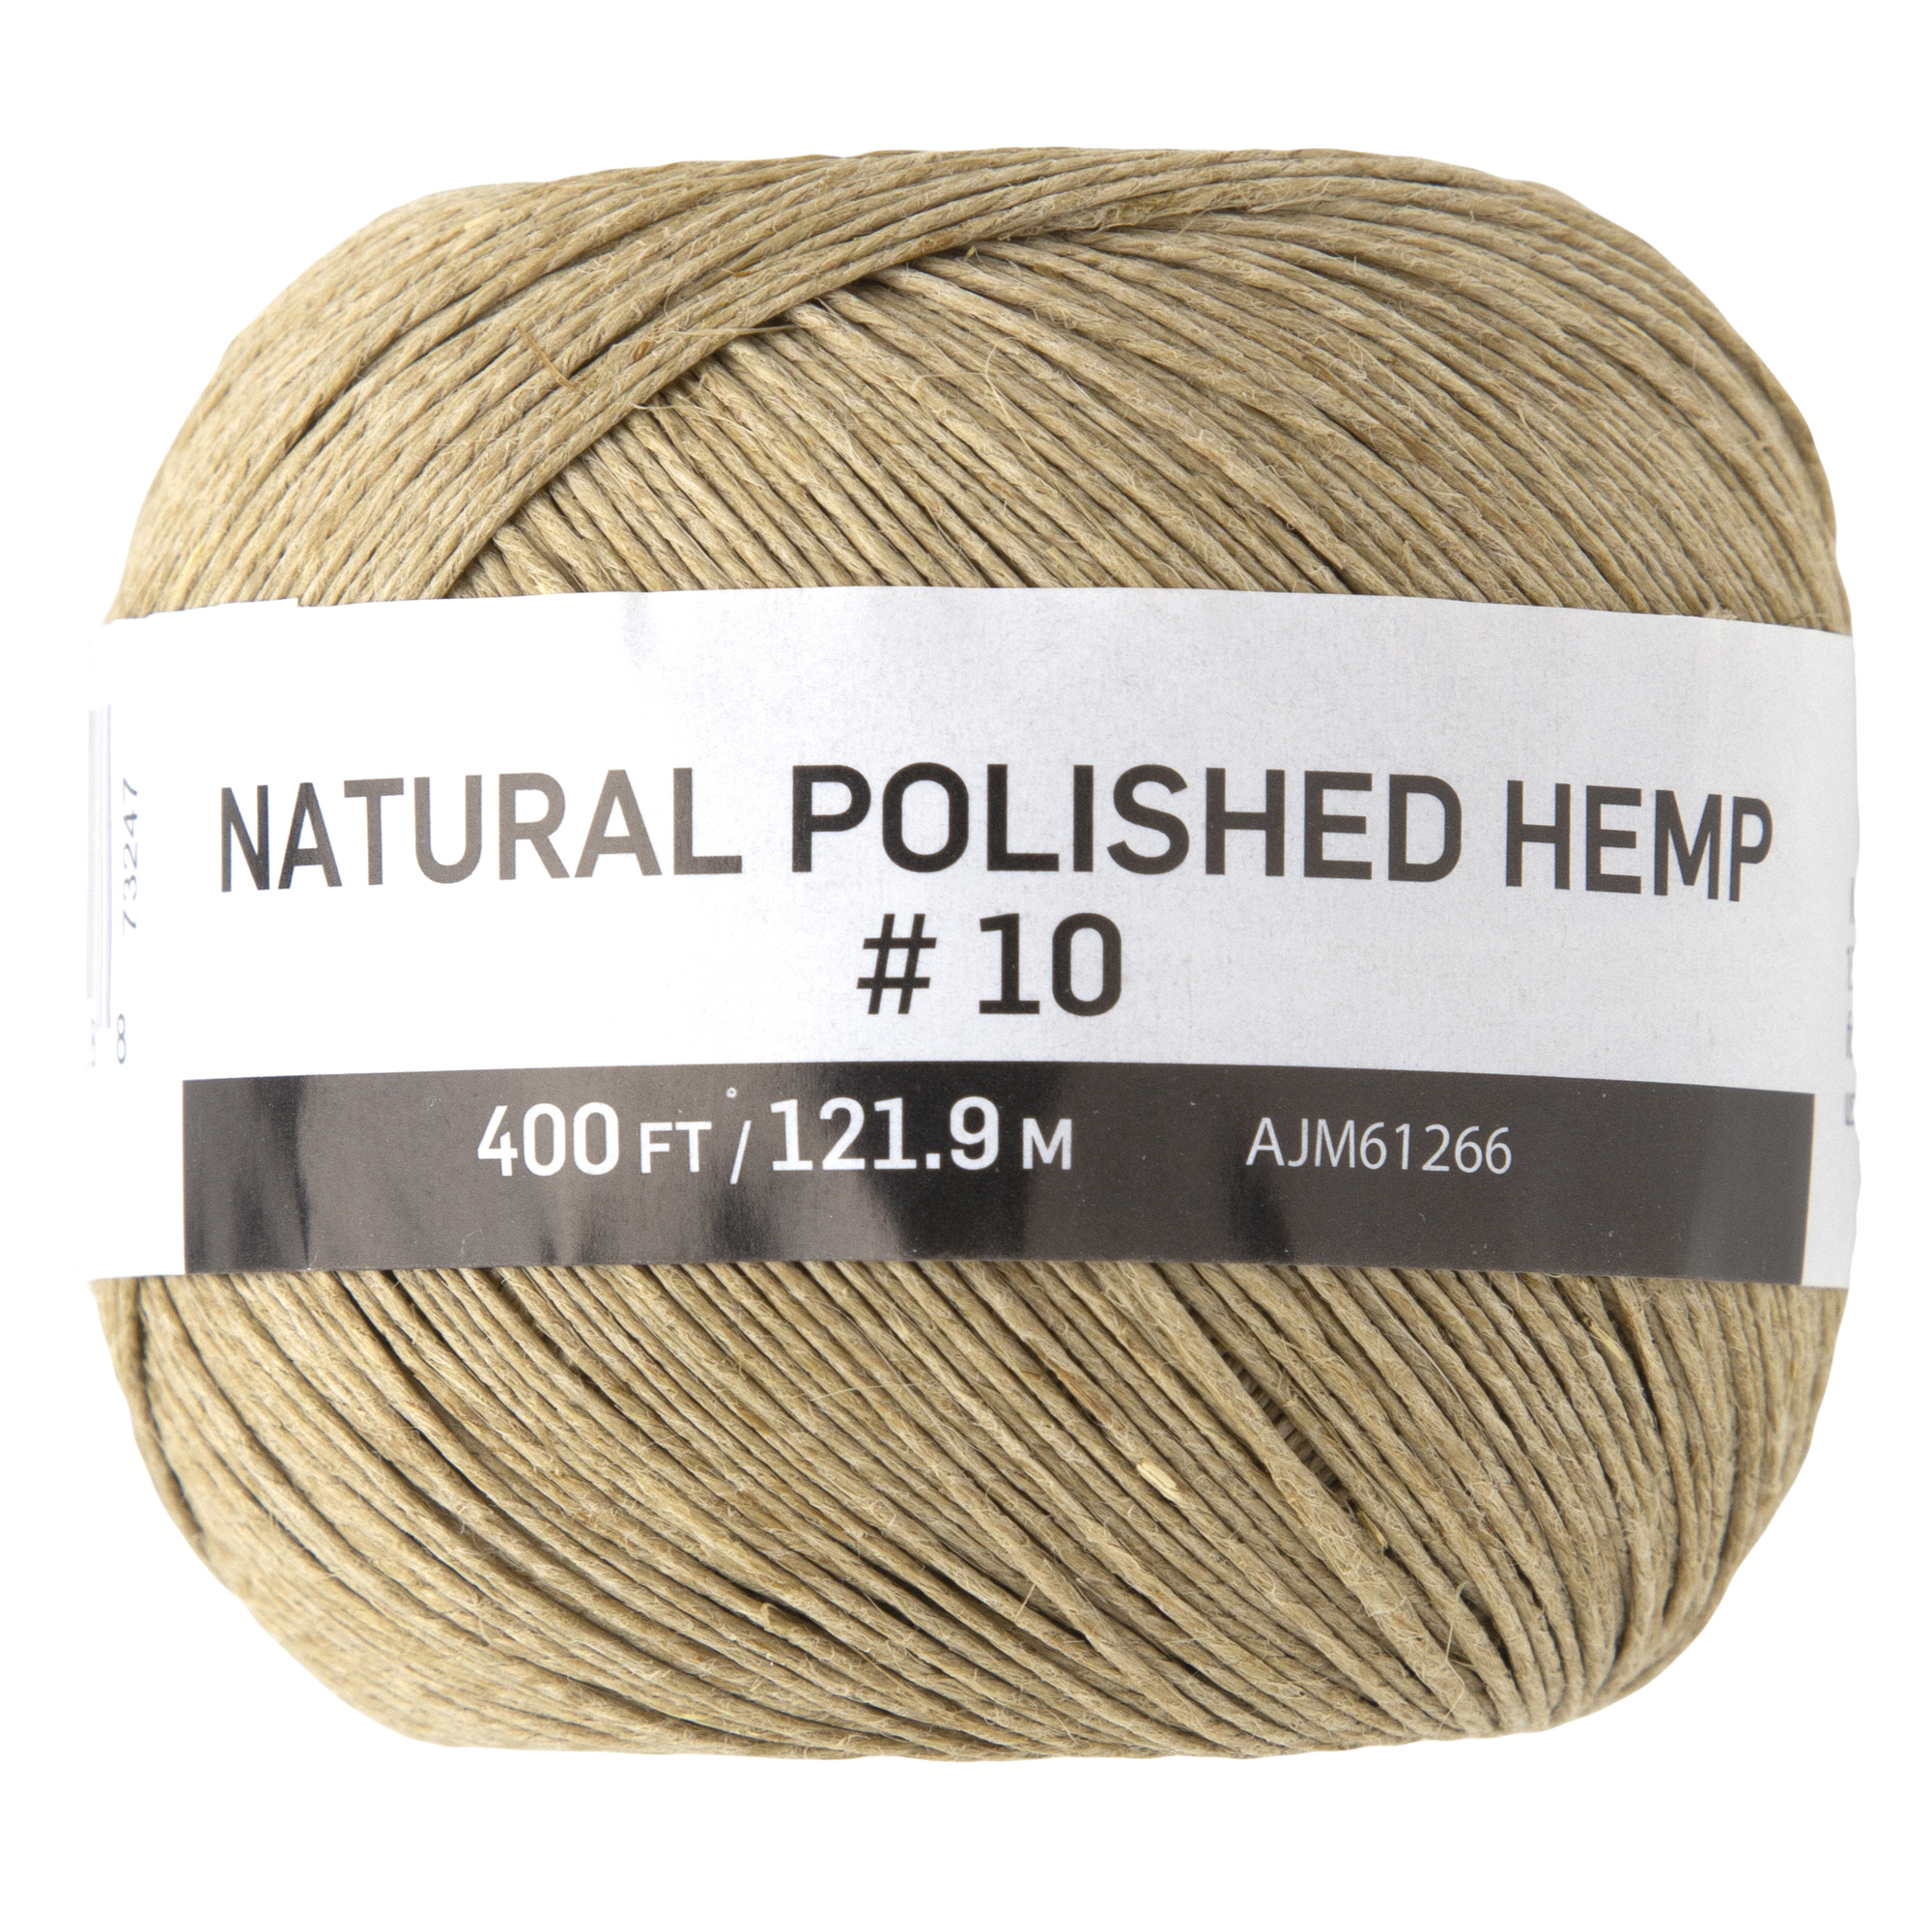 Cousin DIY 10 lb Thin Polished Hemp Cord Twine, 400 ft, Natural Brown - image 2 of 8